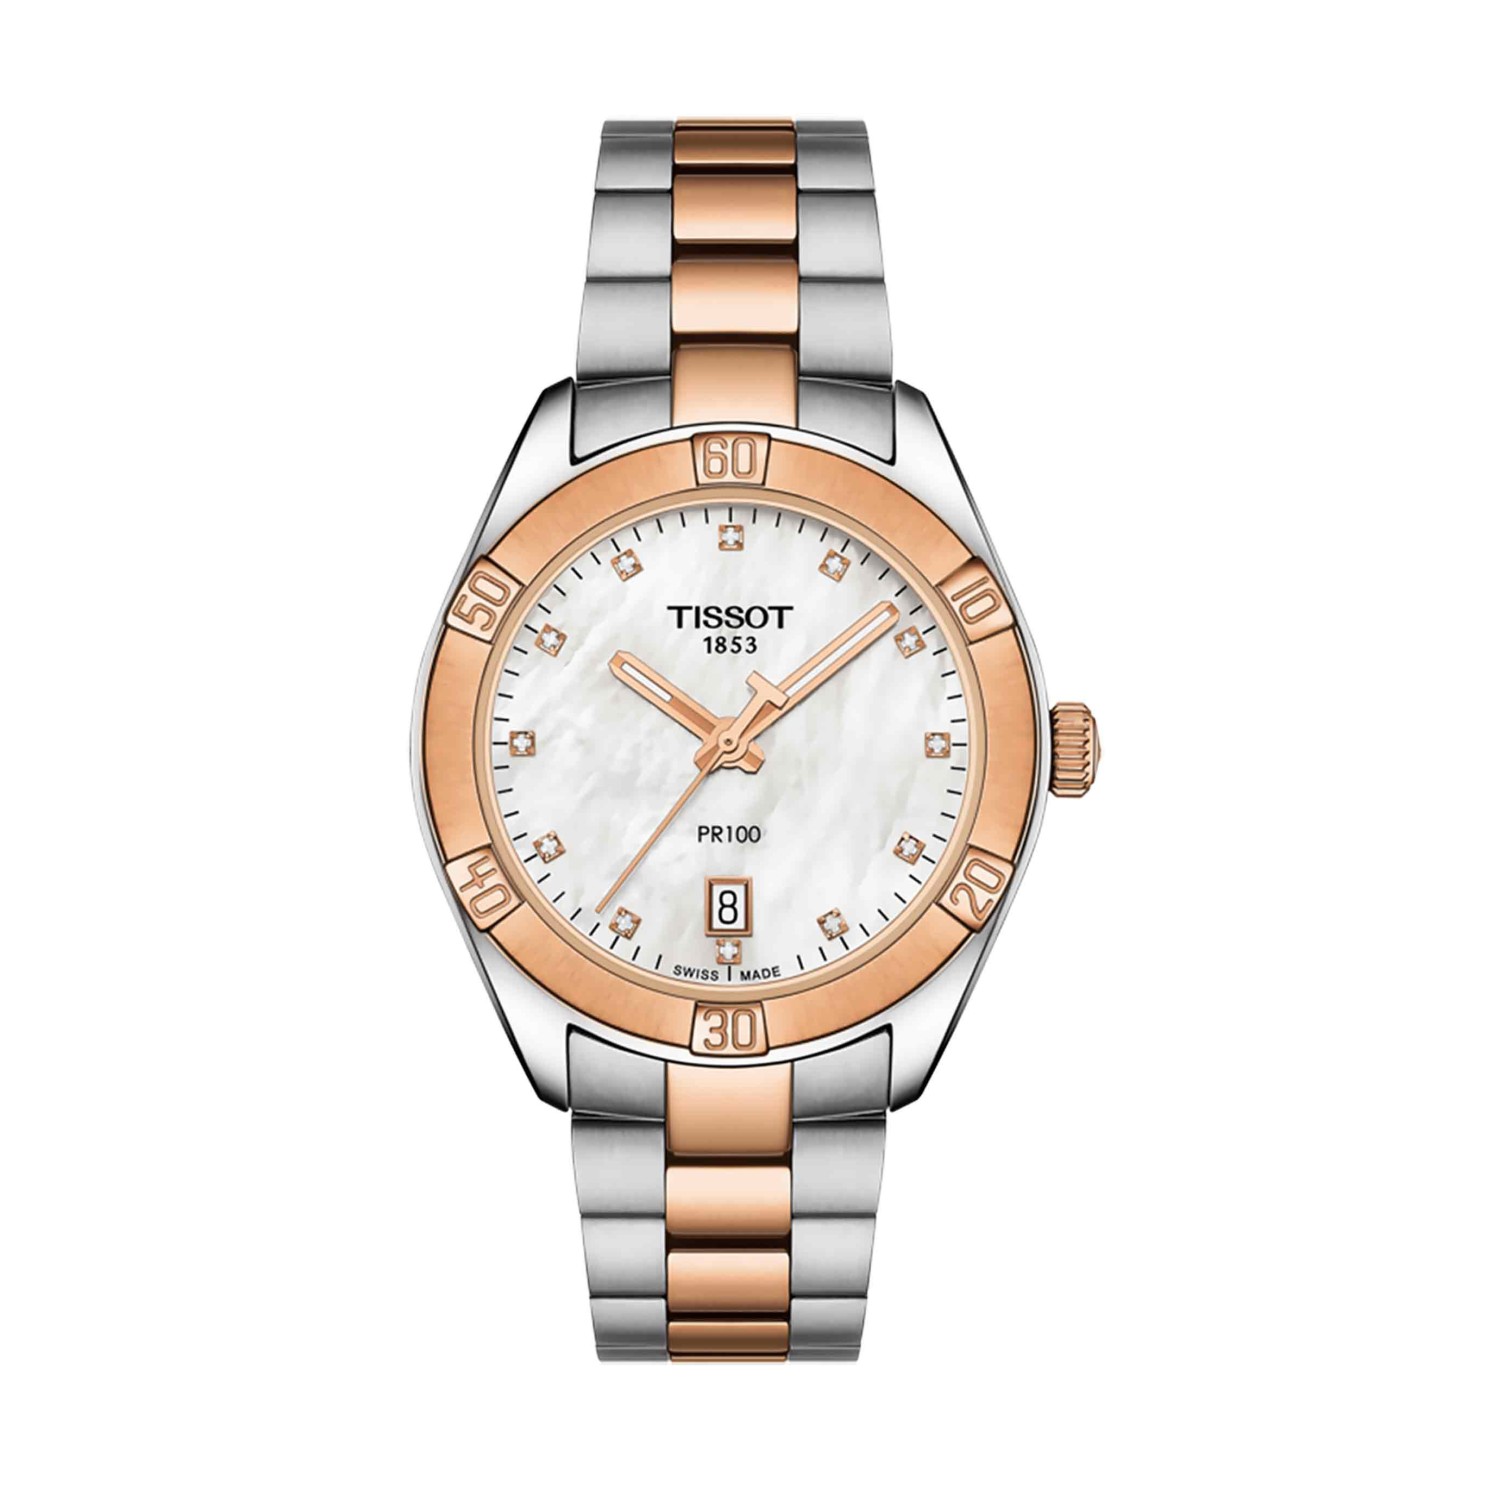 TISSOT PR 100 Diamond Sport Chic T101.910.22.116.00. The Tissot PR 100 is a classic watch destined to be worn often and for every occasion. It features the simple and elegant face the collection is loved for, with the pared-back aesthetic symbolising luxu